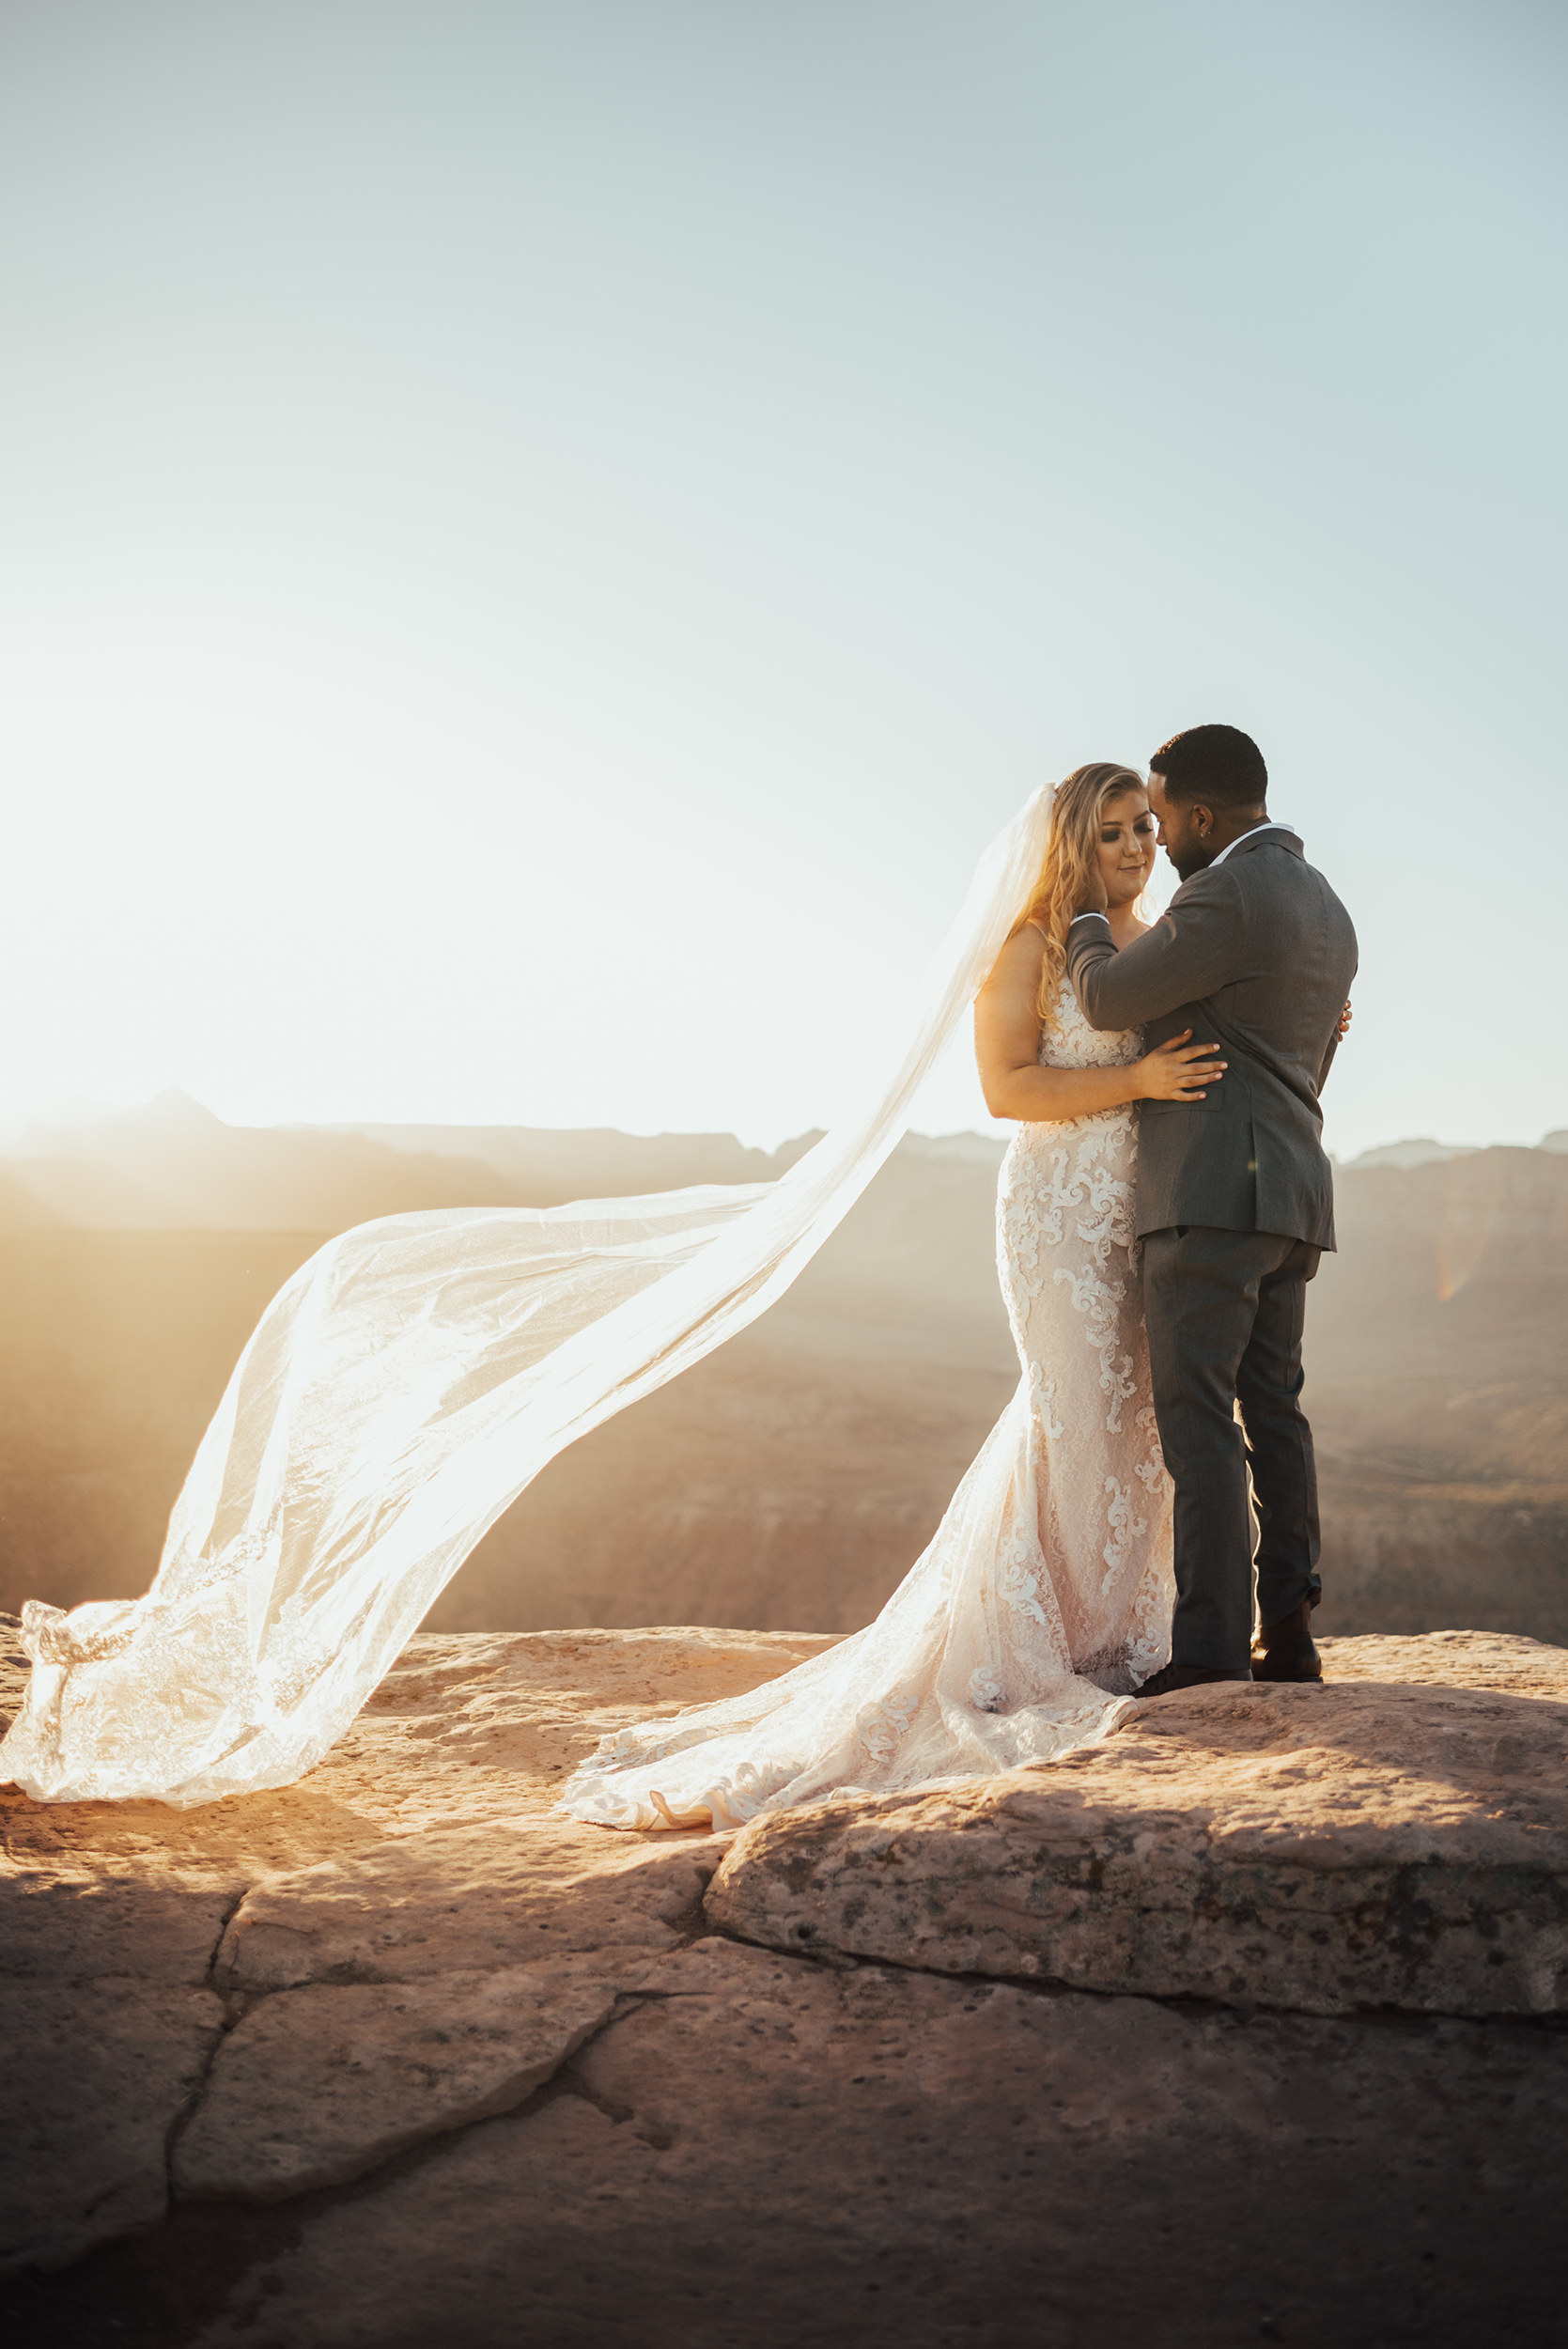 savannah-bridal-shop-ivory-and-beau-maggie-sottero-bride-tuscany-lynette-zion-national-park-wedding-utah-wedding-savannah-wedding-dresses-savannah-wedding-gowns-ashley-smith-photography-vanilla-and-the-bean-12.JPG